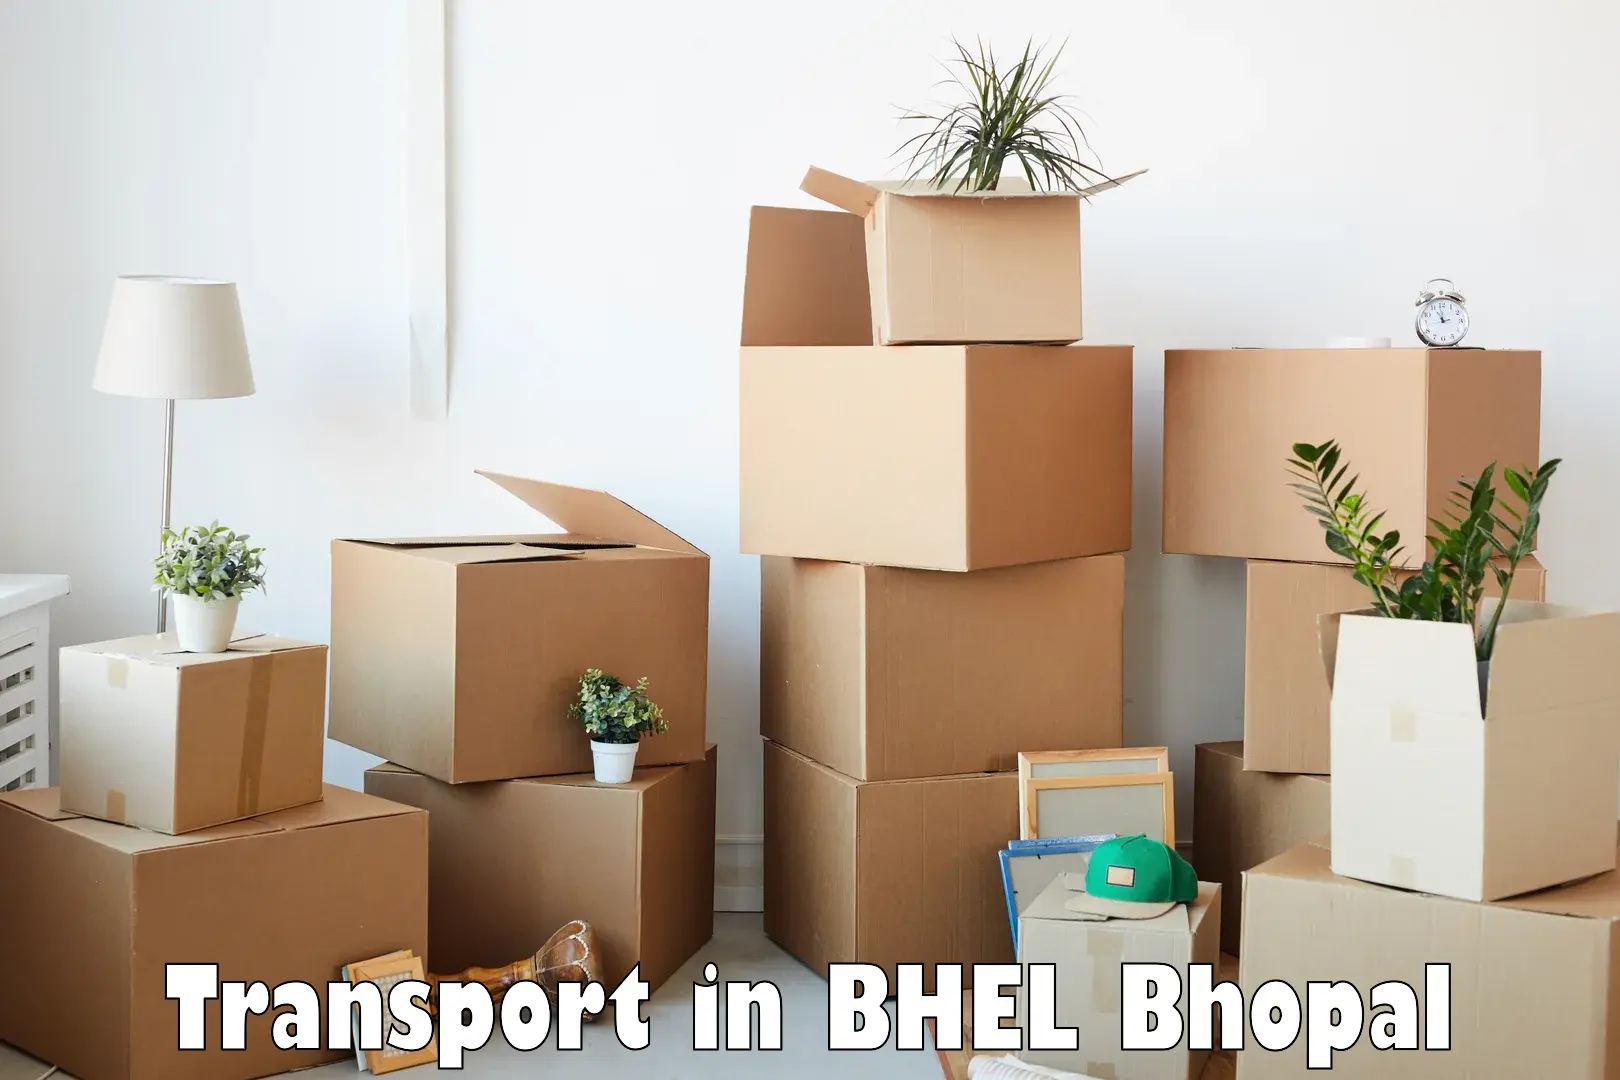 Cargo transport services in BHEL Bhopal